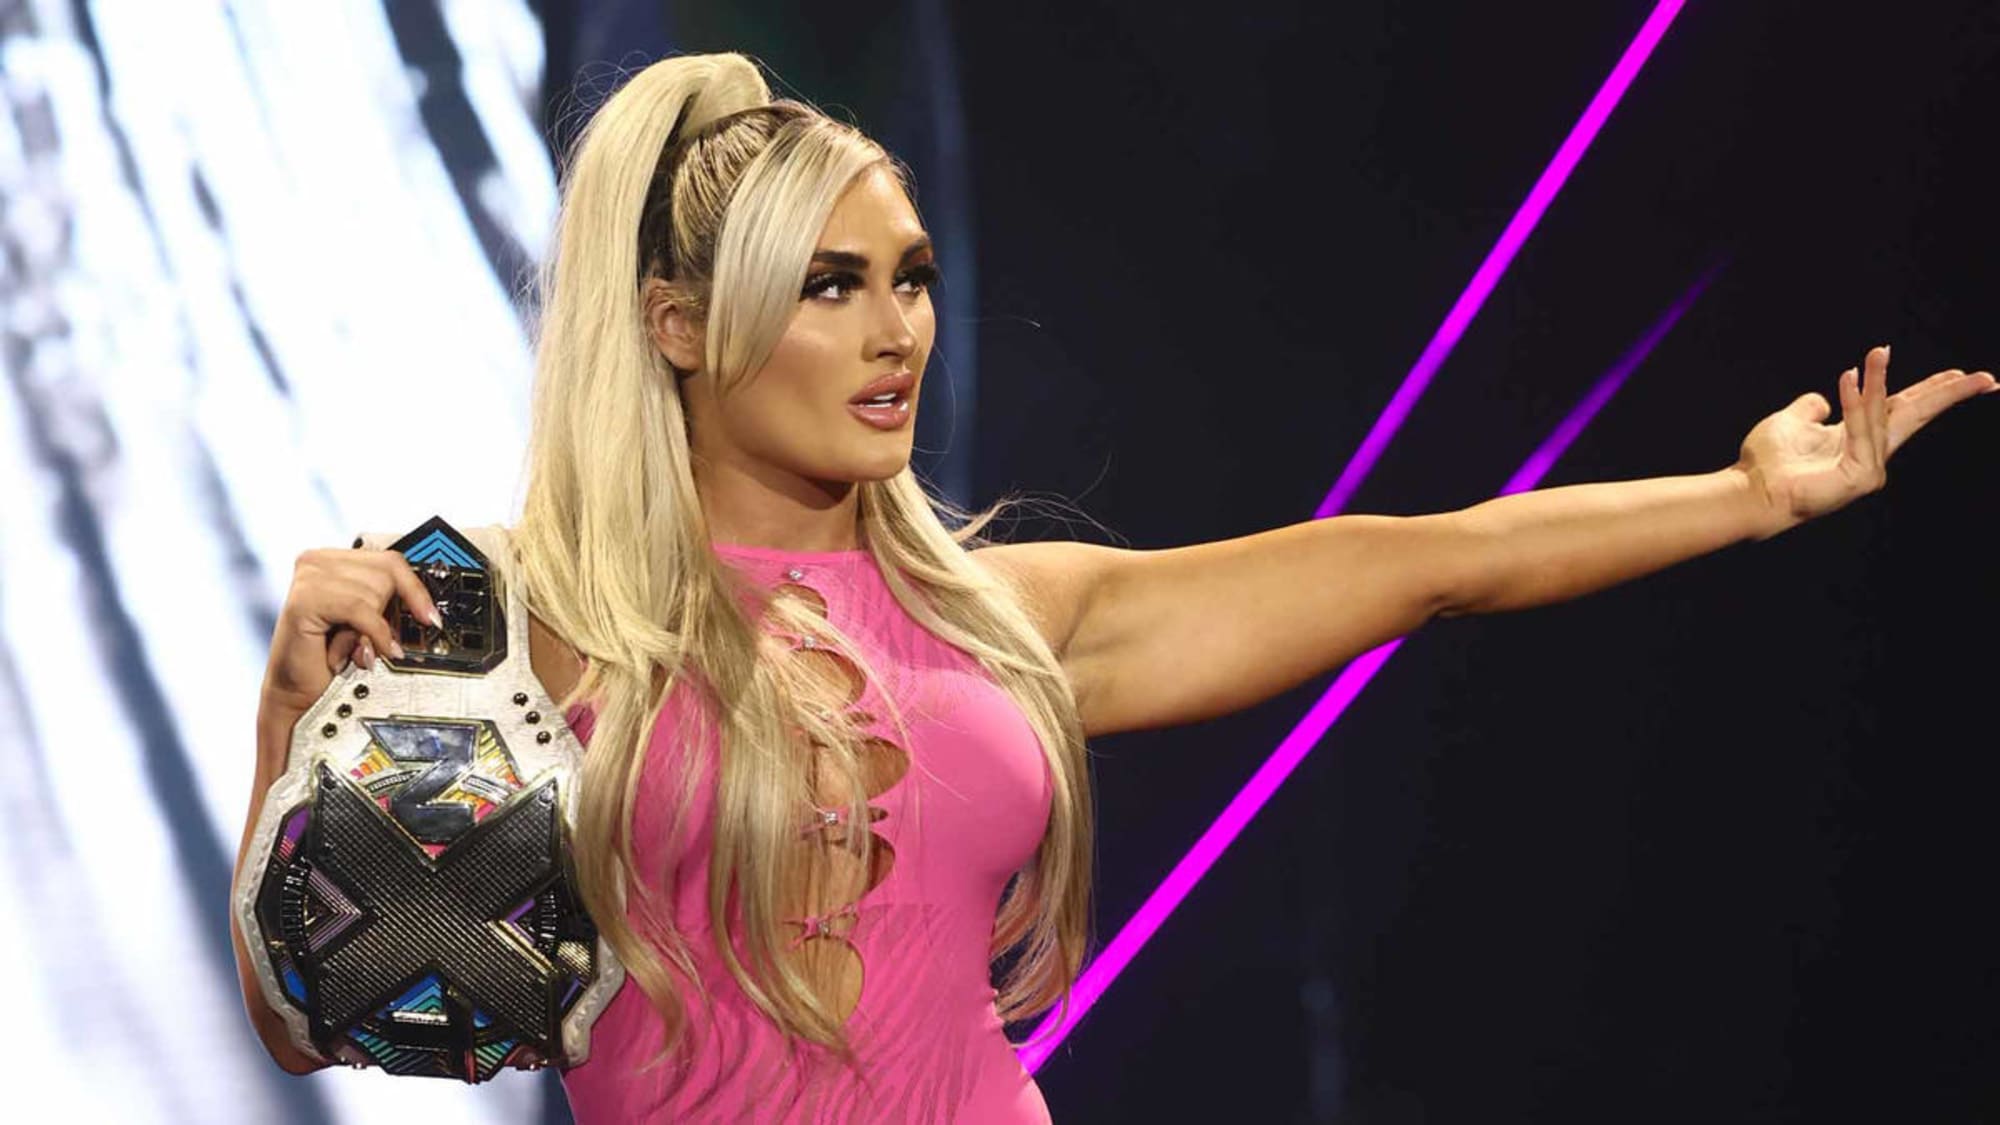 NXT No Mercy was a star-making moment for Tiffany Stratton